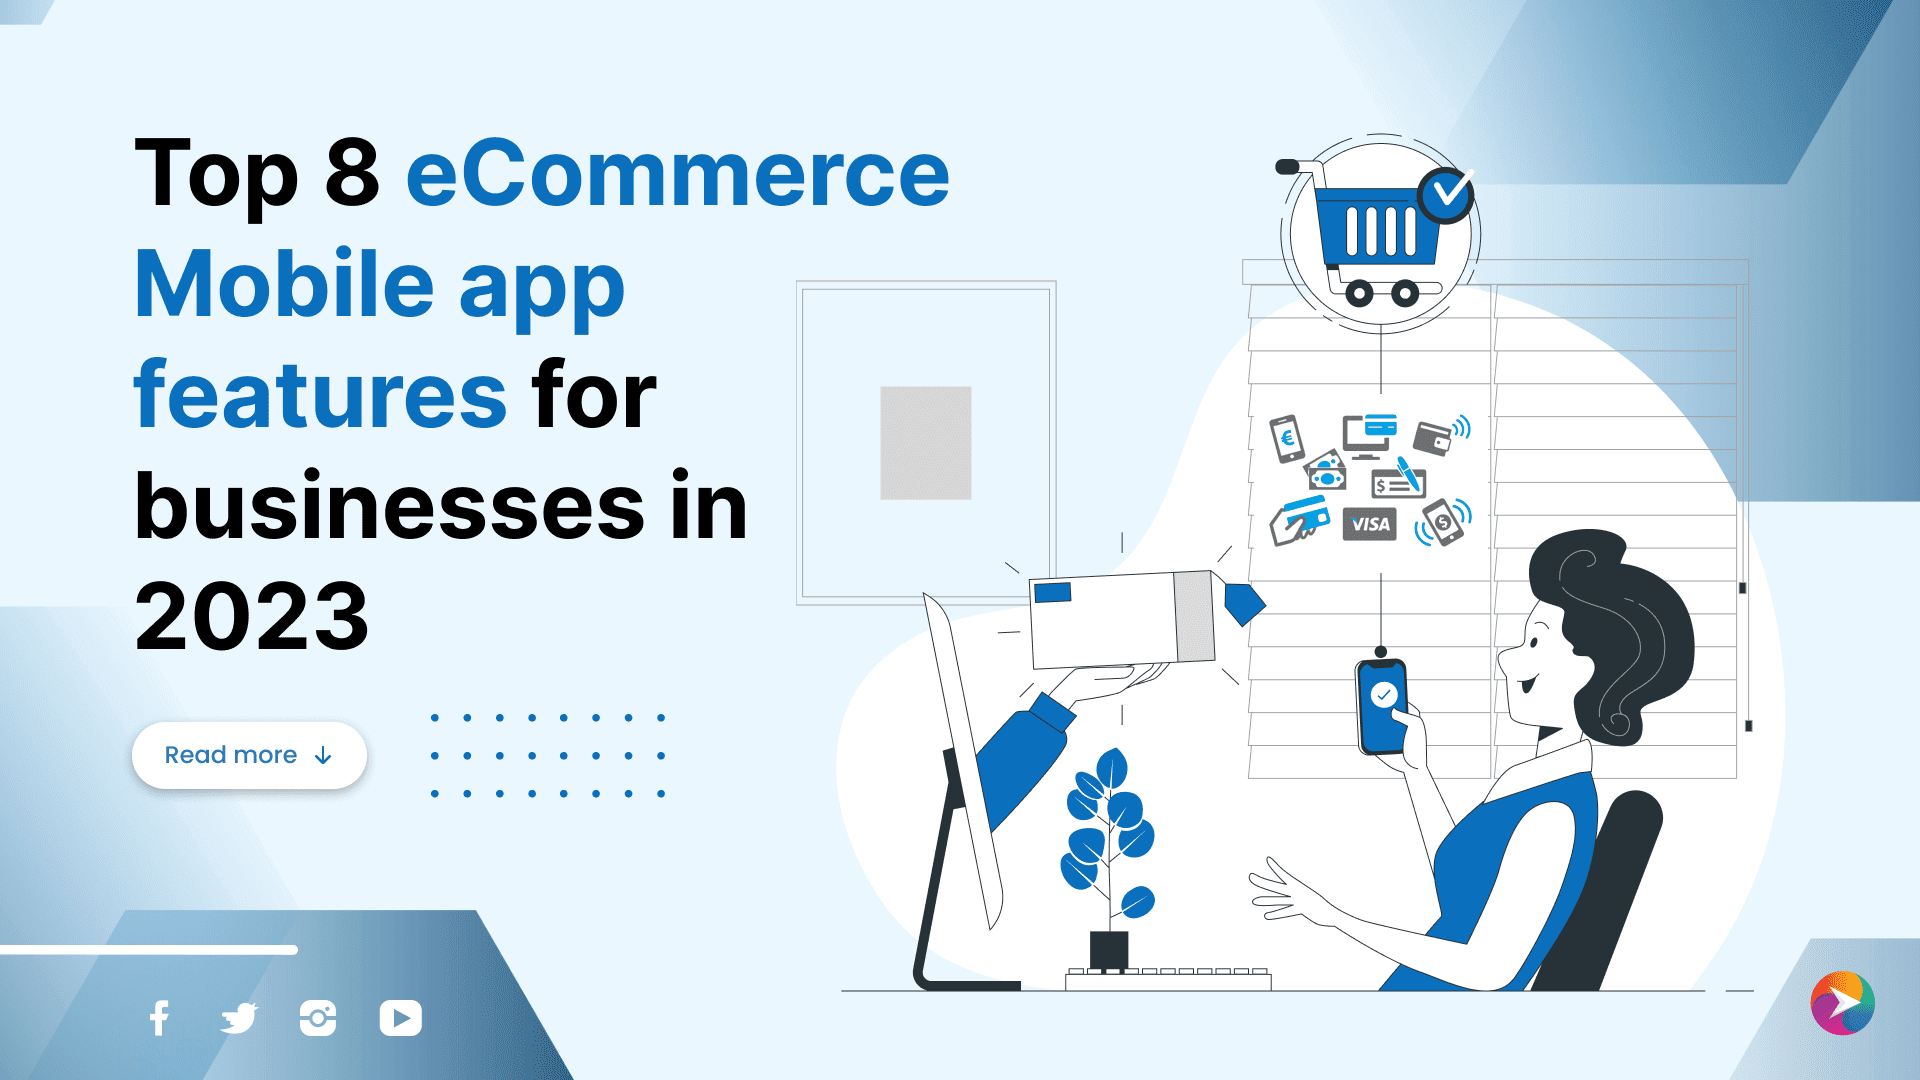 Top 8 eCommerce Mobile app features for businesses in 2023